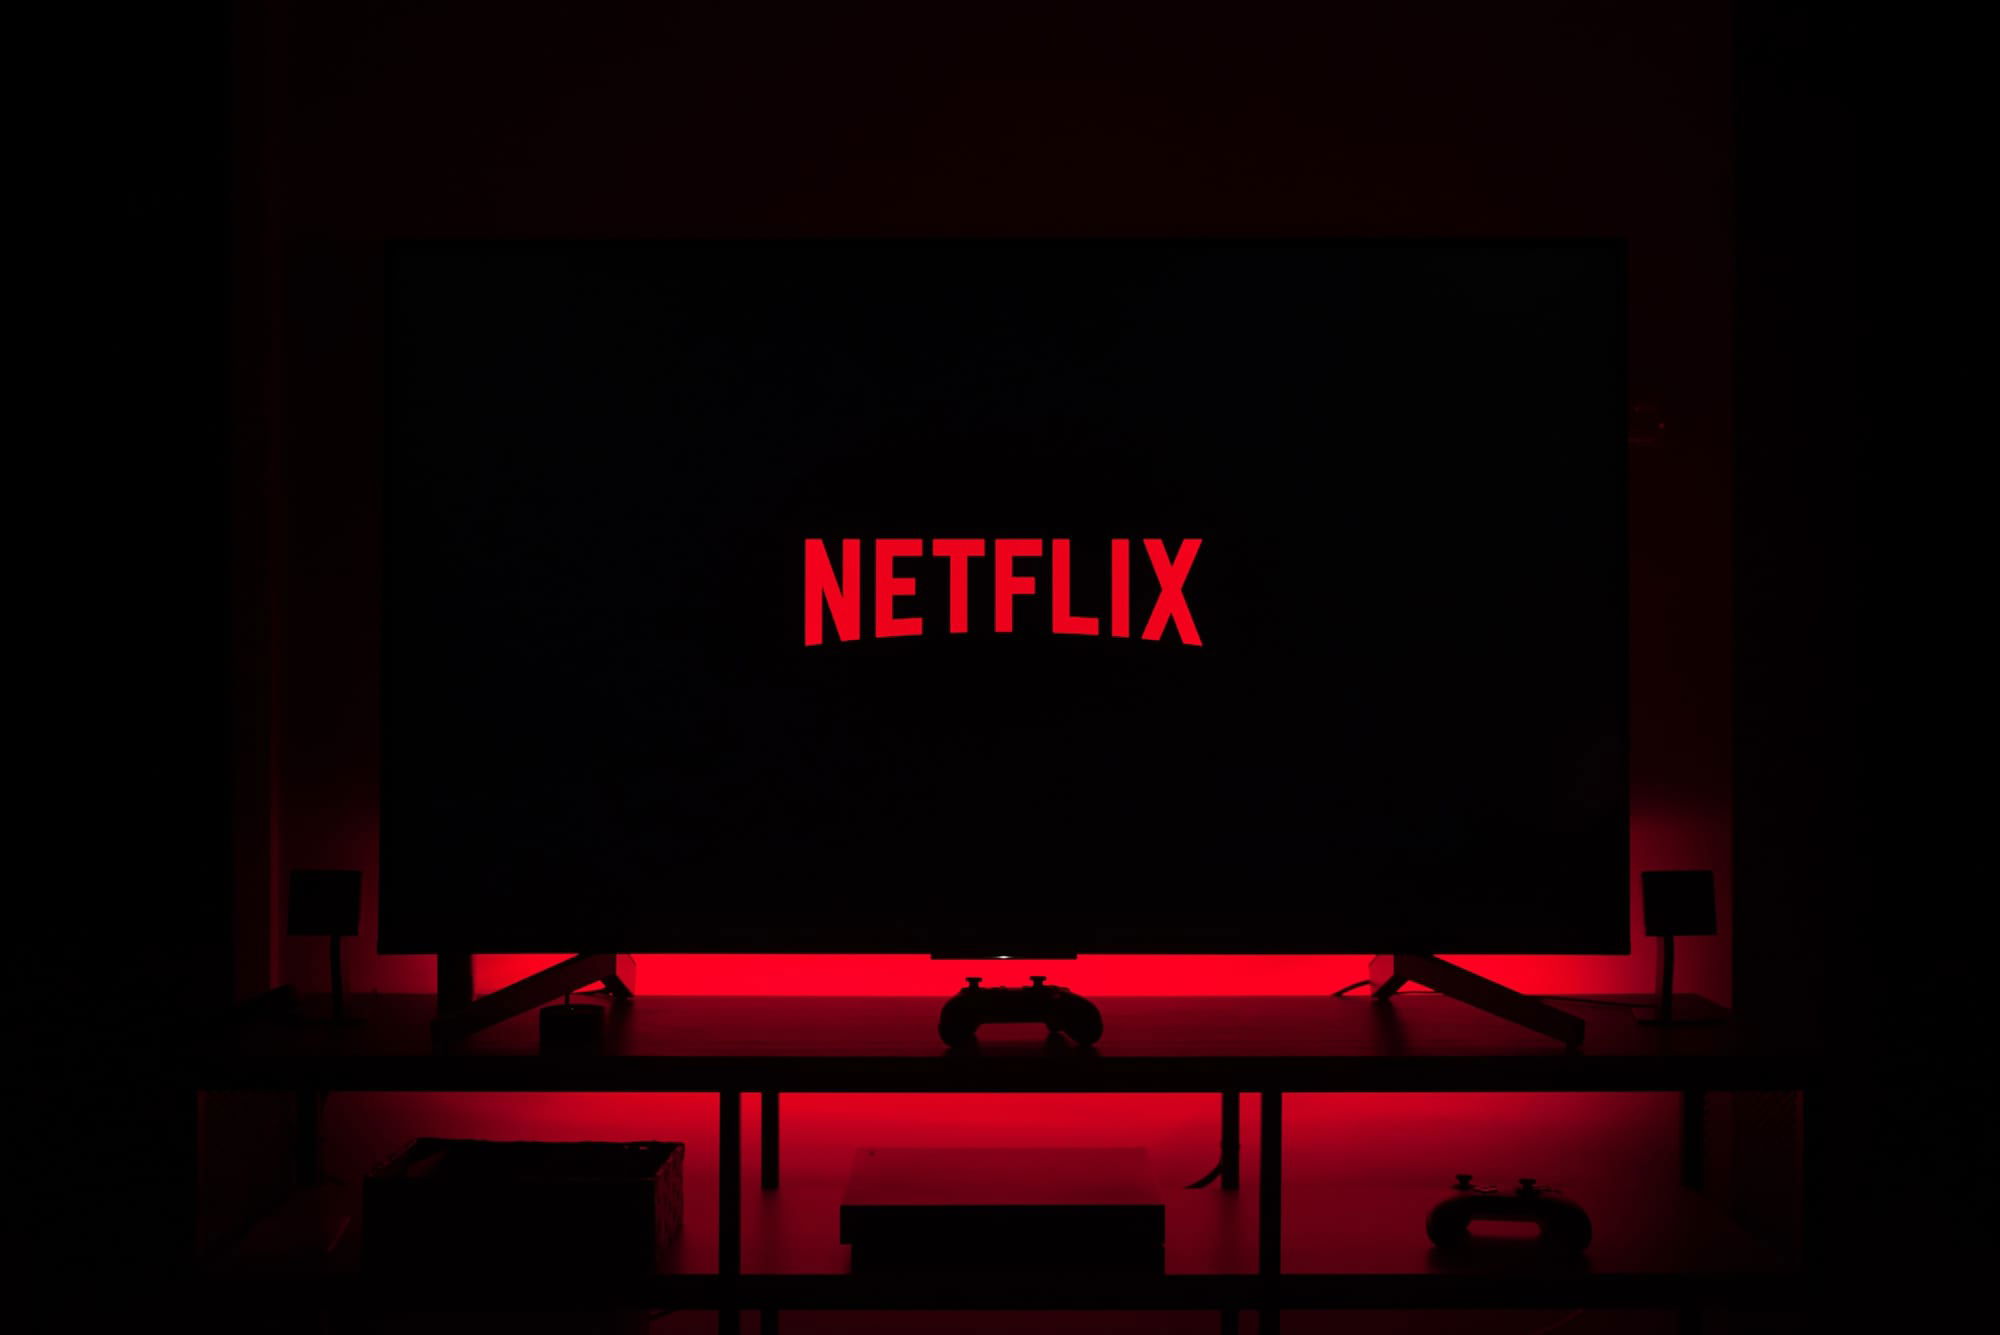 Mind-Blowing Netflix Stats and Facts: The Real Effect of Covid on Business